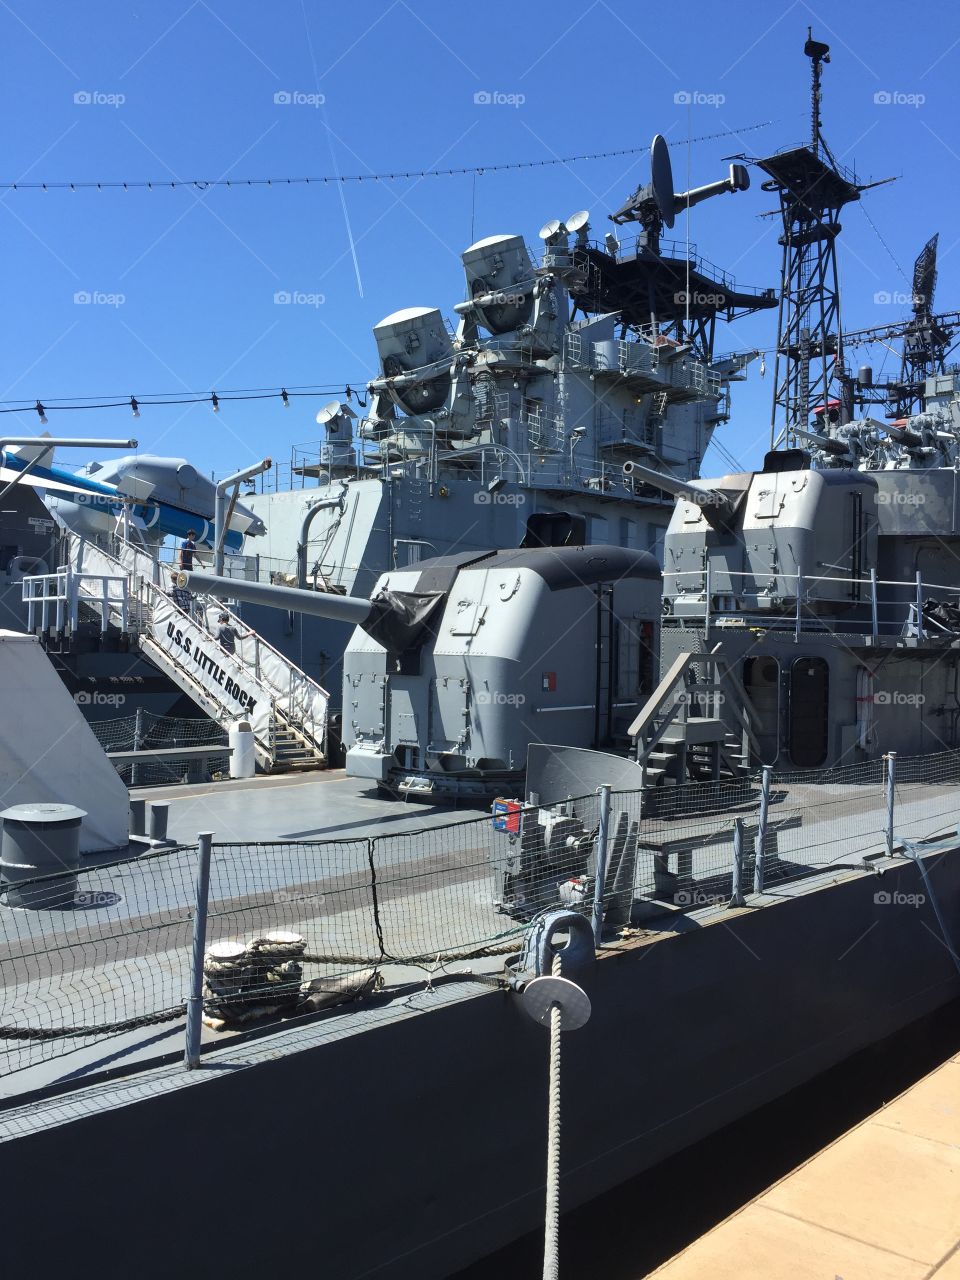 USS Sulivans. Visit to Buffalo & Erie county Naval & Military Park